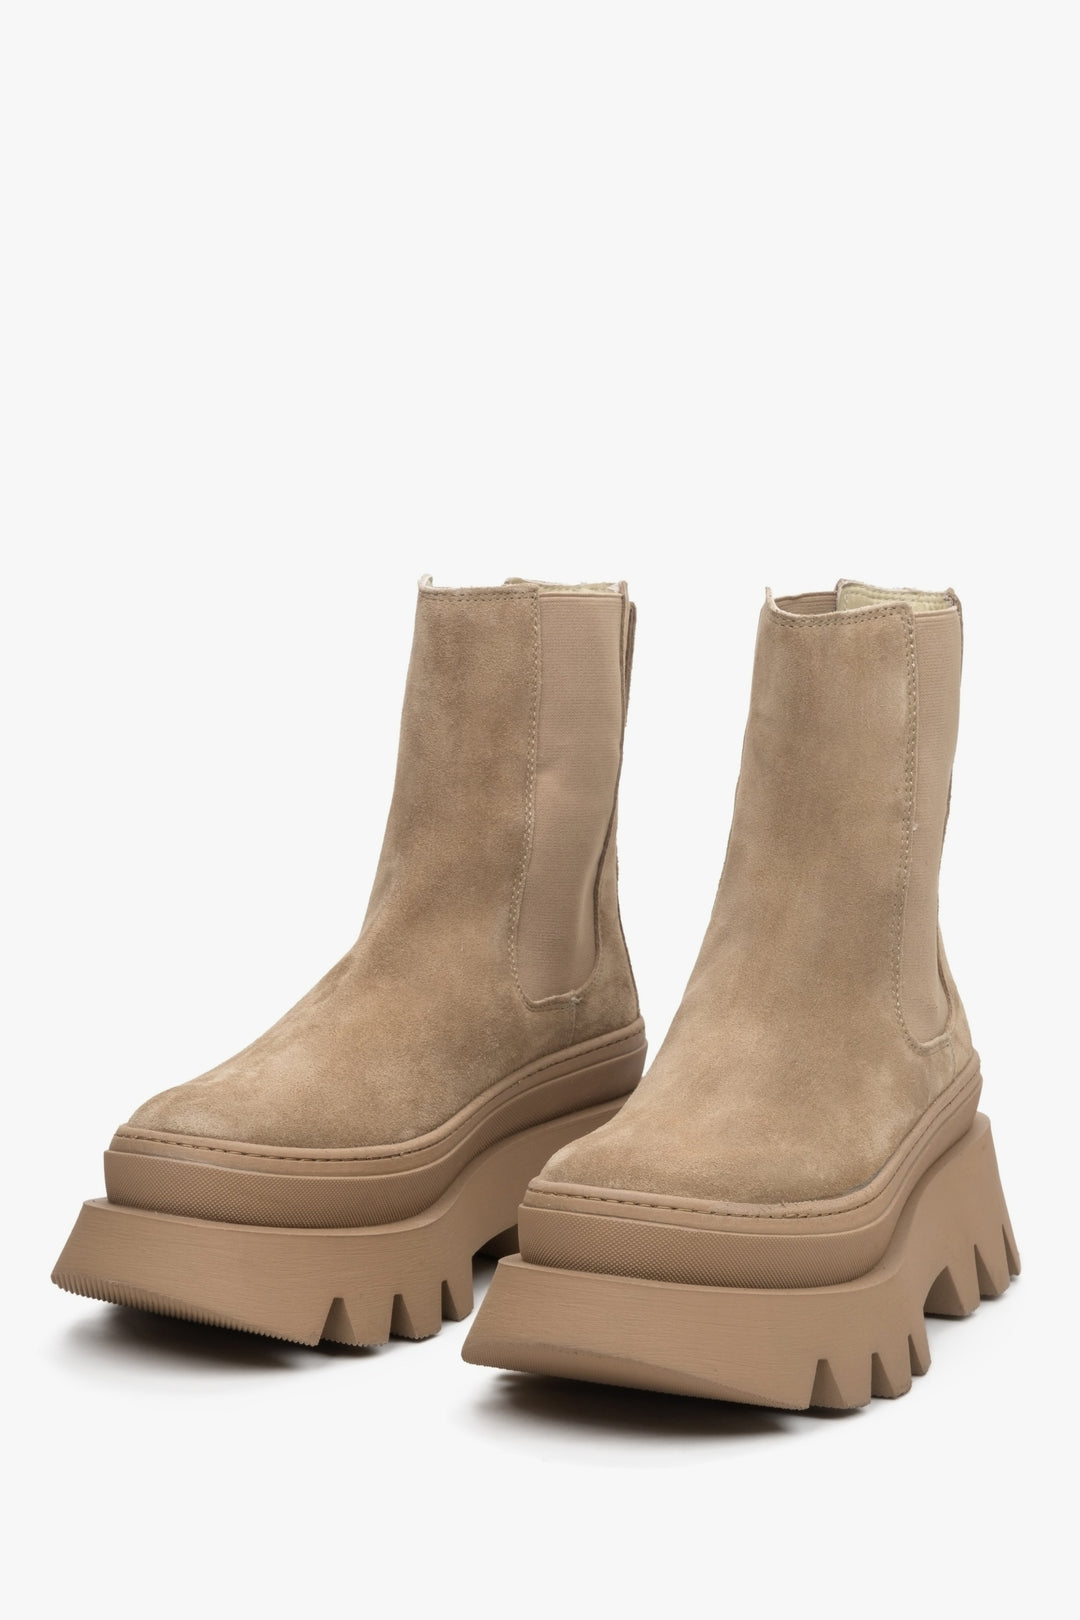 Women's brown platform chelsea boots by Estro - close-up on the toe.